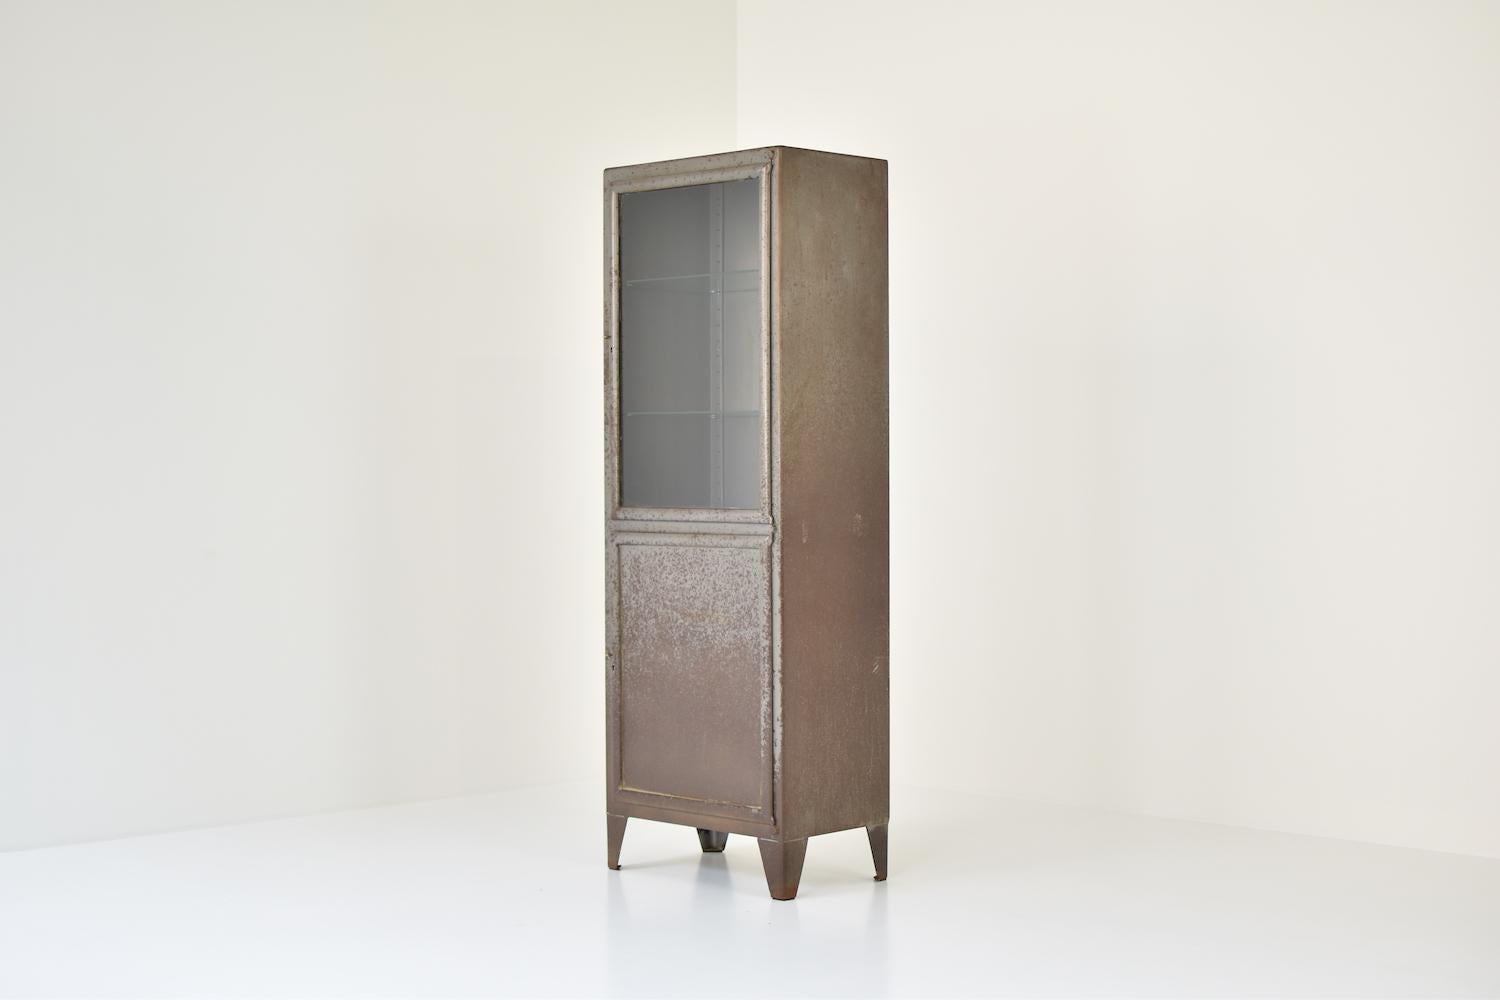 Rough patinated industrial vitrine cabinet, France, 1950s. This cabinet features two storage compartments: an ‘open’ storage with 2 glass shelves and a ‘closed’ one with 1 wooden shelf. Lots of patina!